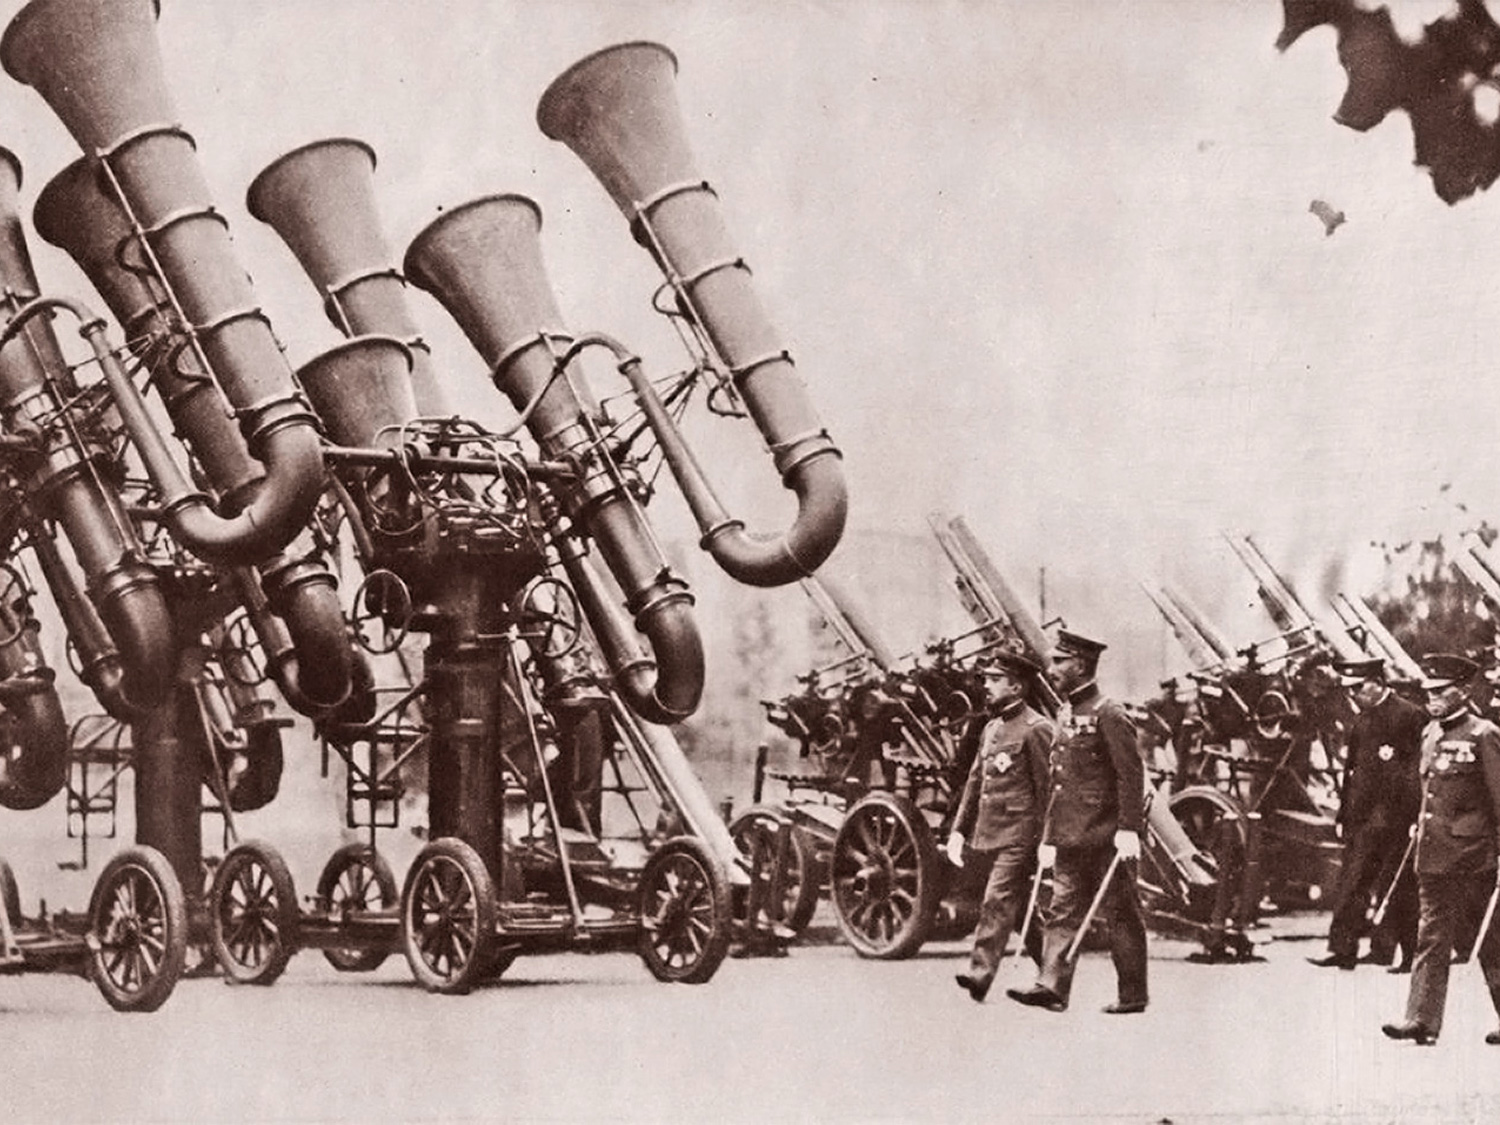 Image shows Japanese emperor Hirohito inspecting a series of Type 90 Japanese sound trumpets placed on trolleys 1930